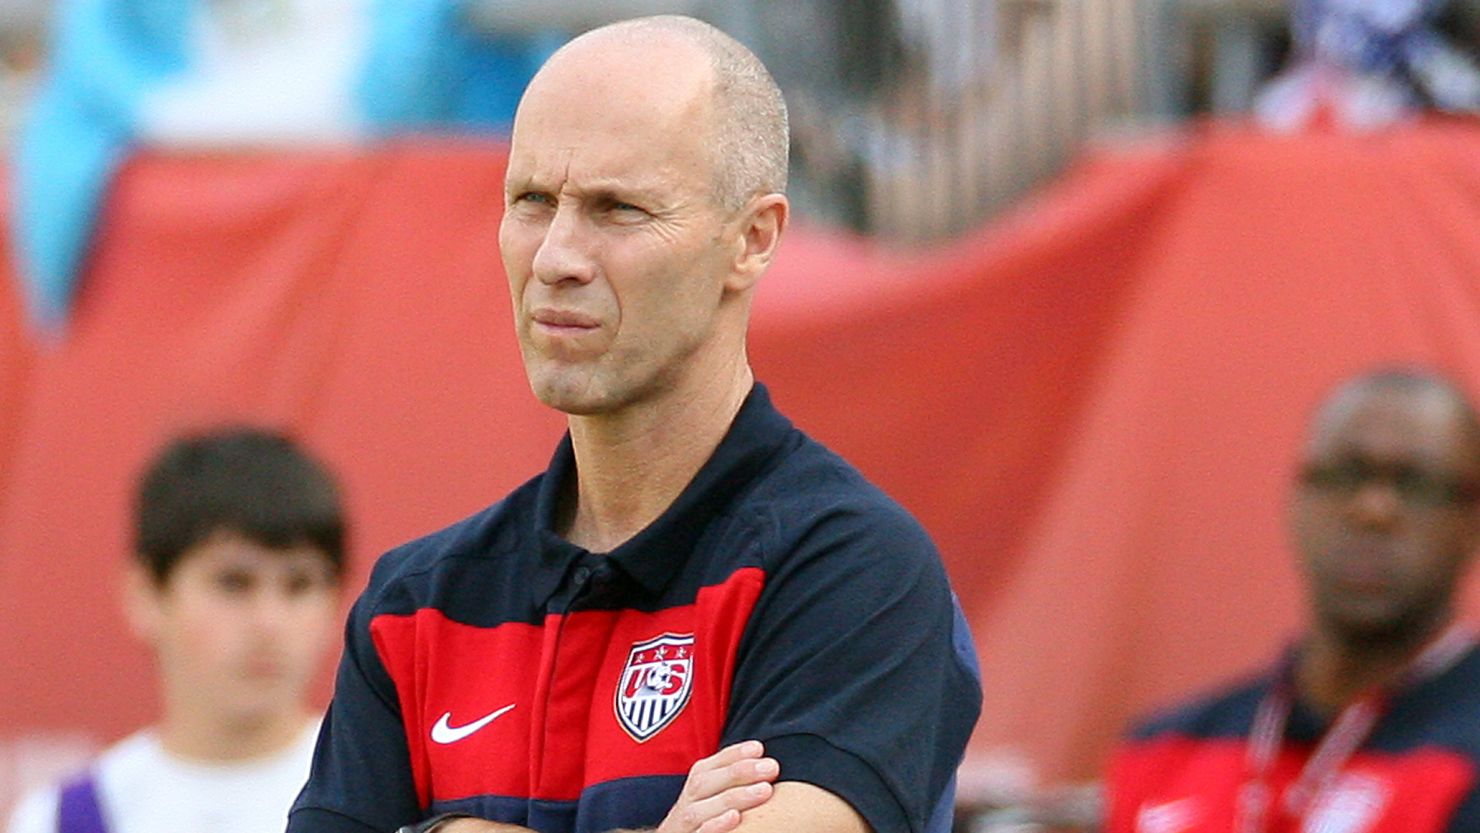 Bob Bradley took over as U.S. coach in 2006 and led his team to the last 16 of the 2010 World Cup.